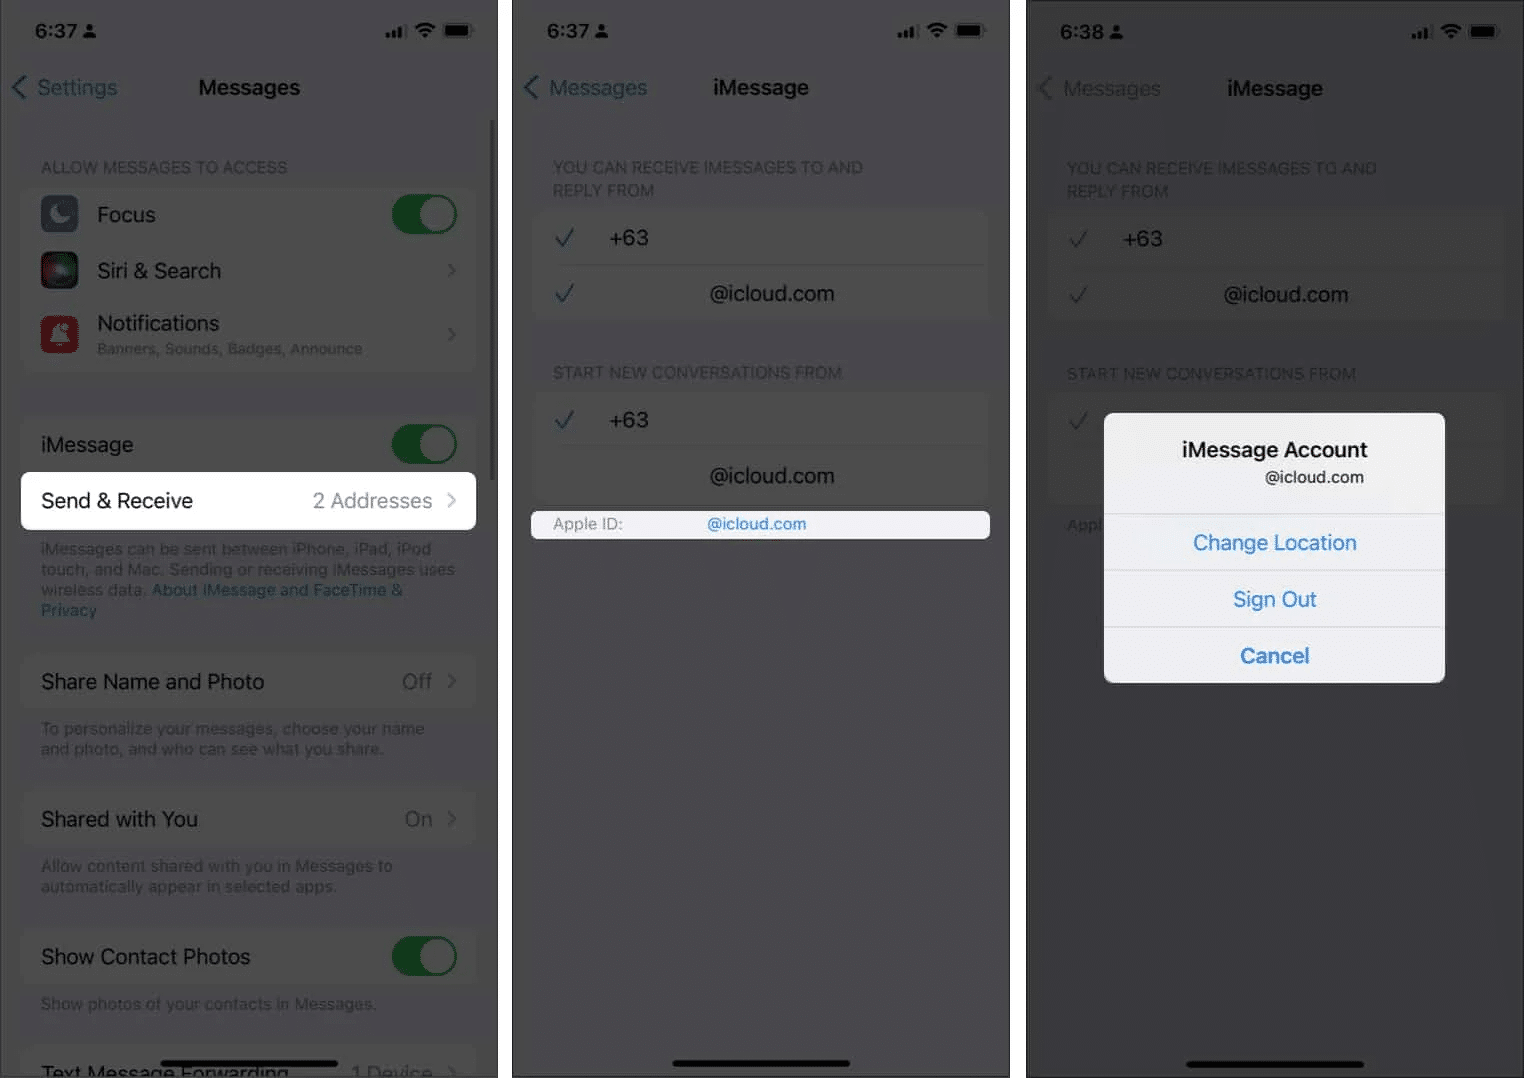 Sign out and back in with Apple ID